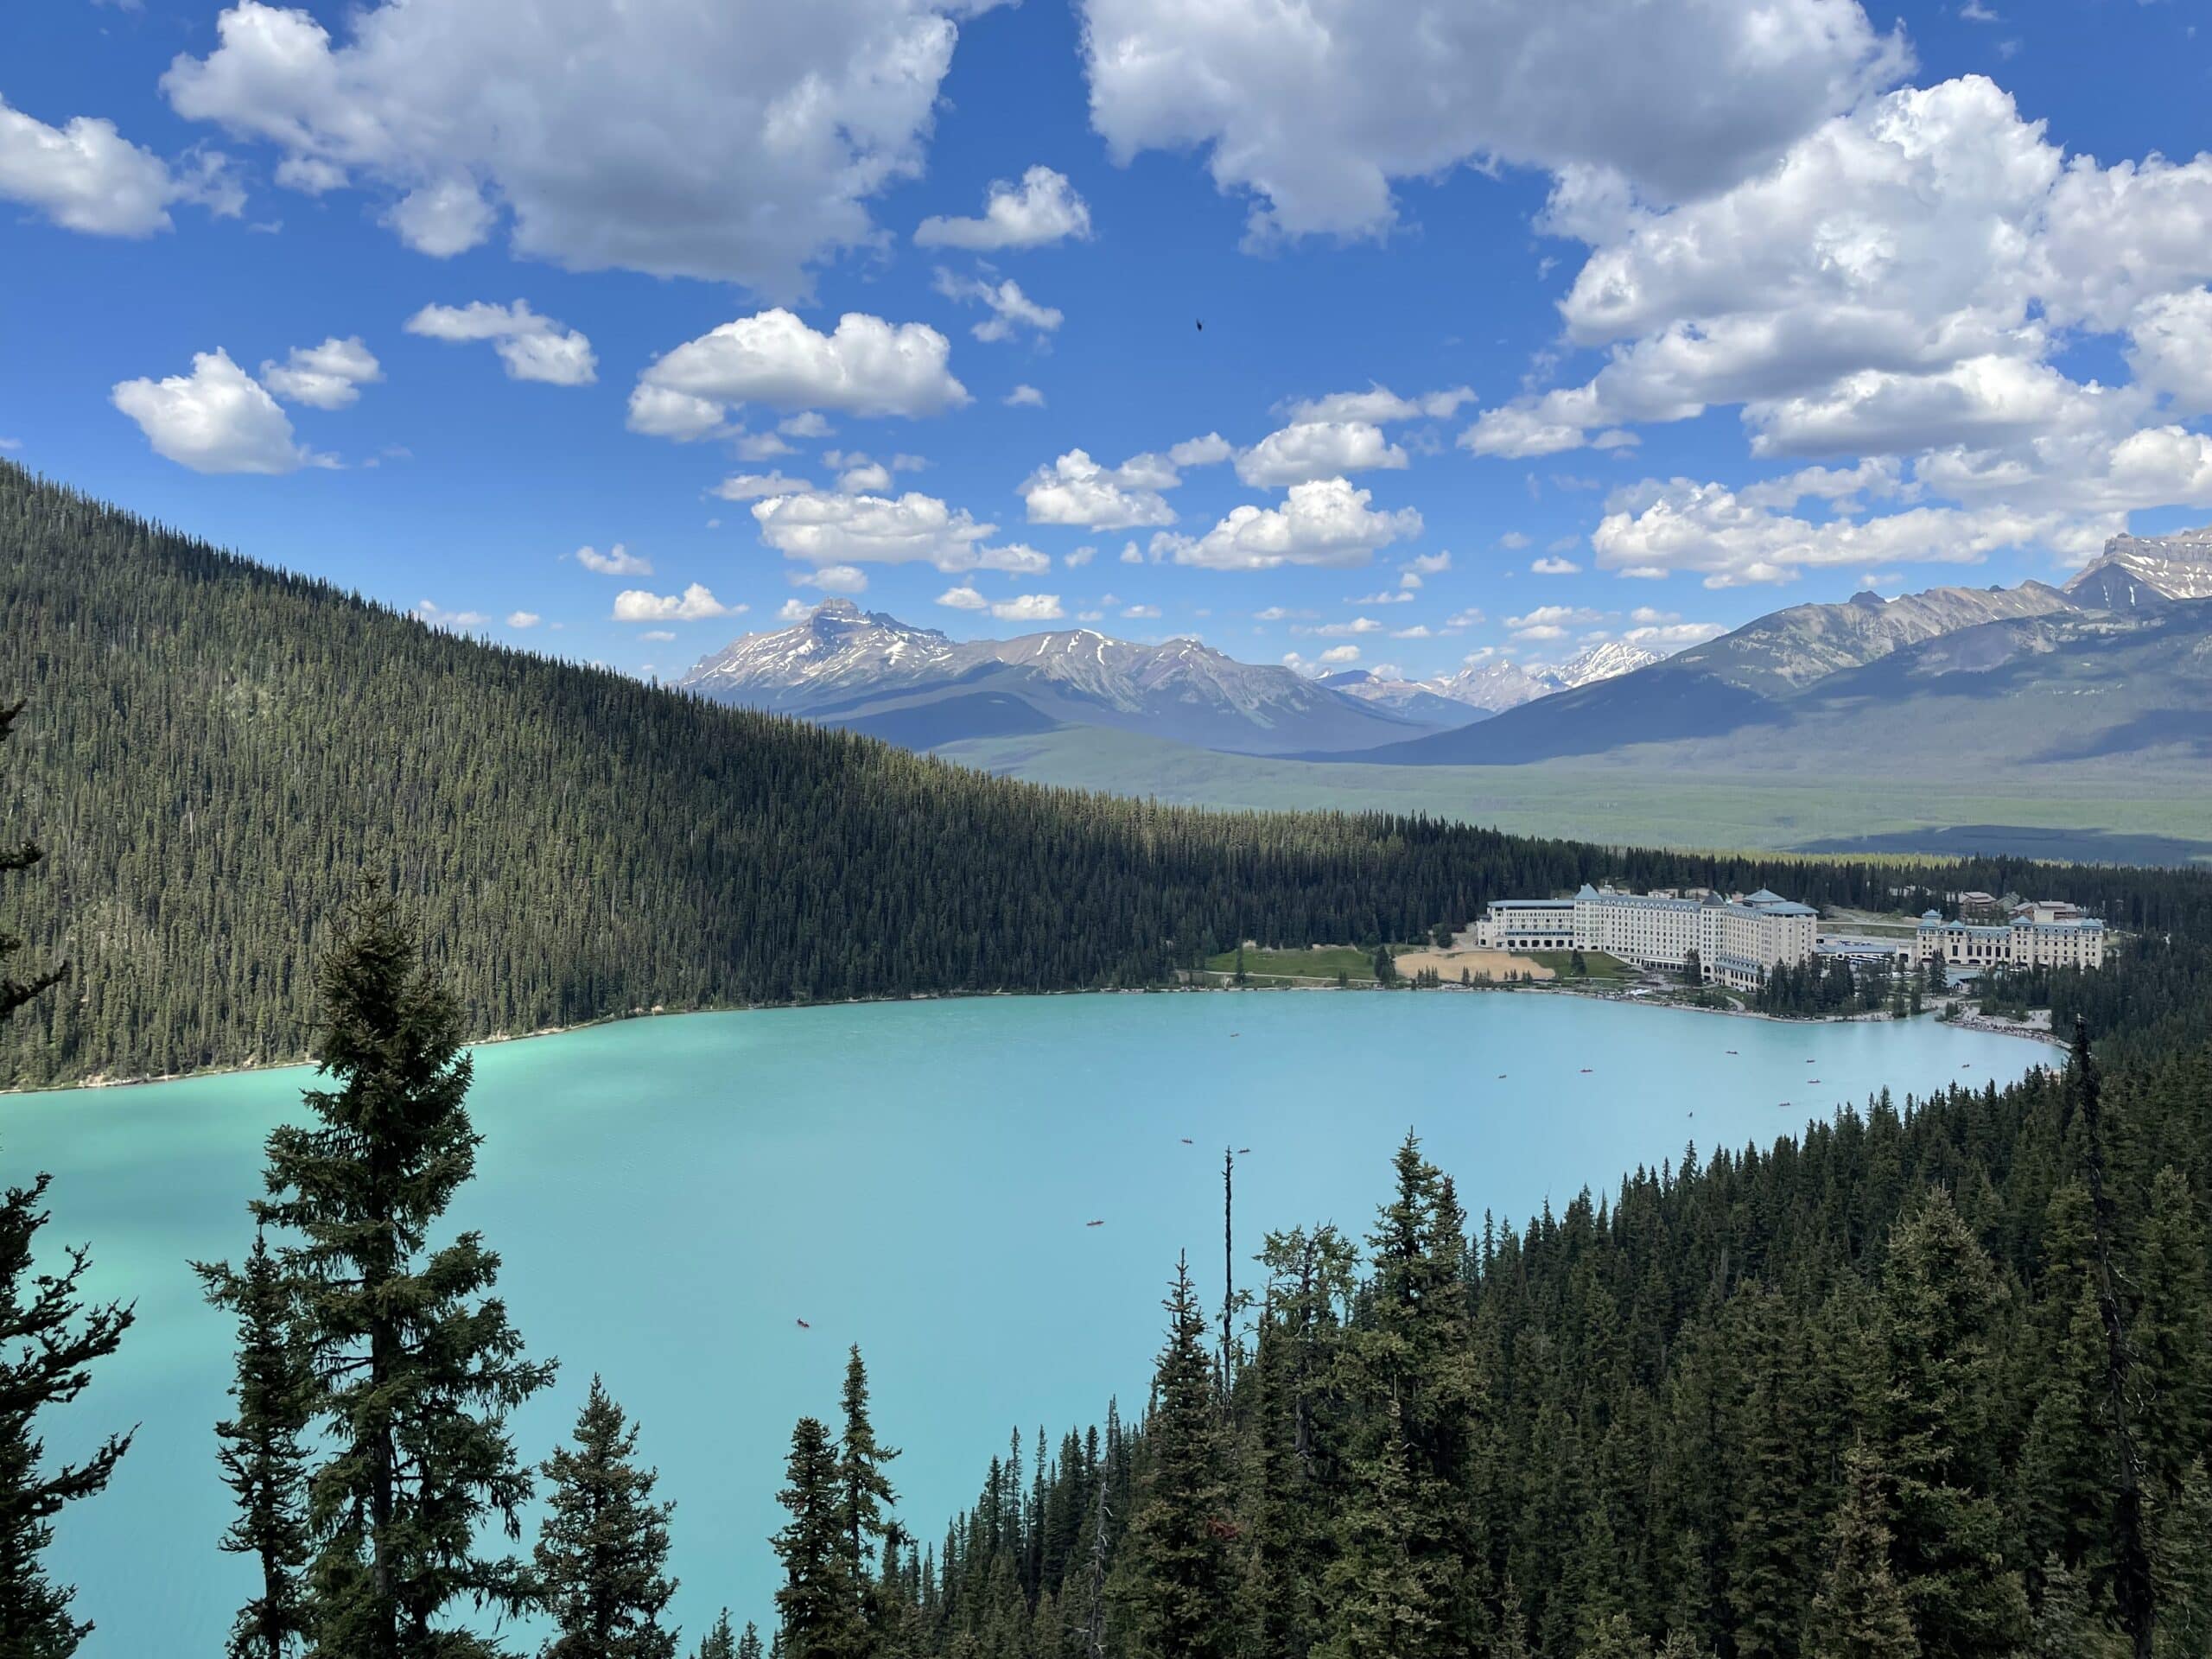 https://www.discovercanadatours.com/wp-content/uploads/2022/10/LakeLouise2-scaled.jpg